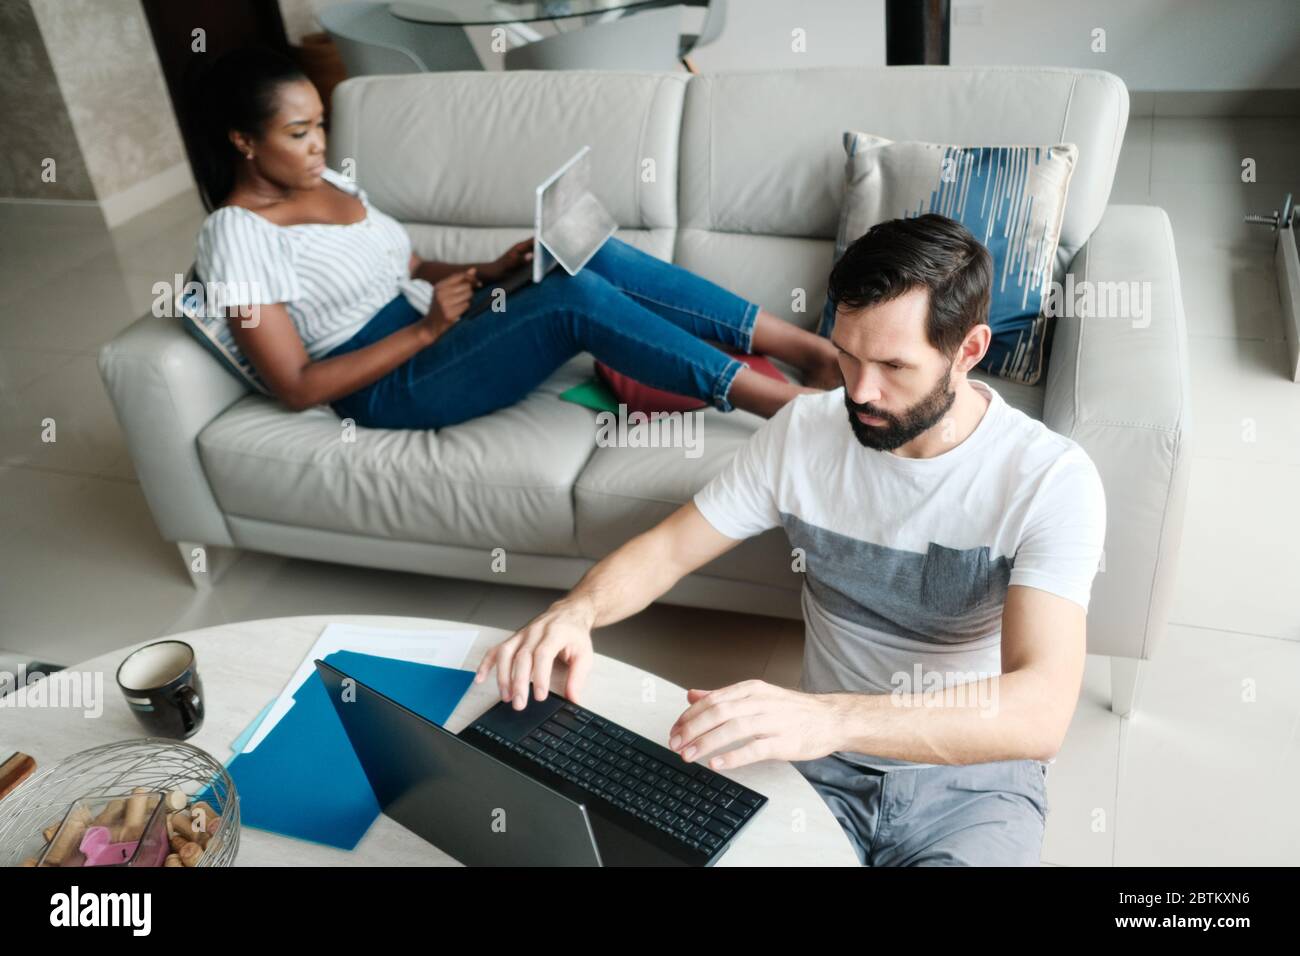 Couple Working And Playing With Laptop Computer At Home Stock Photo